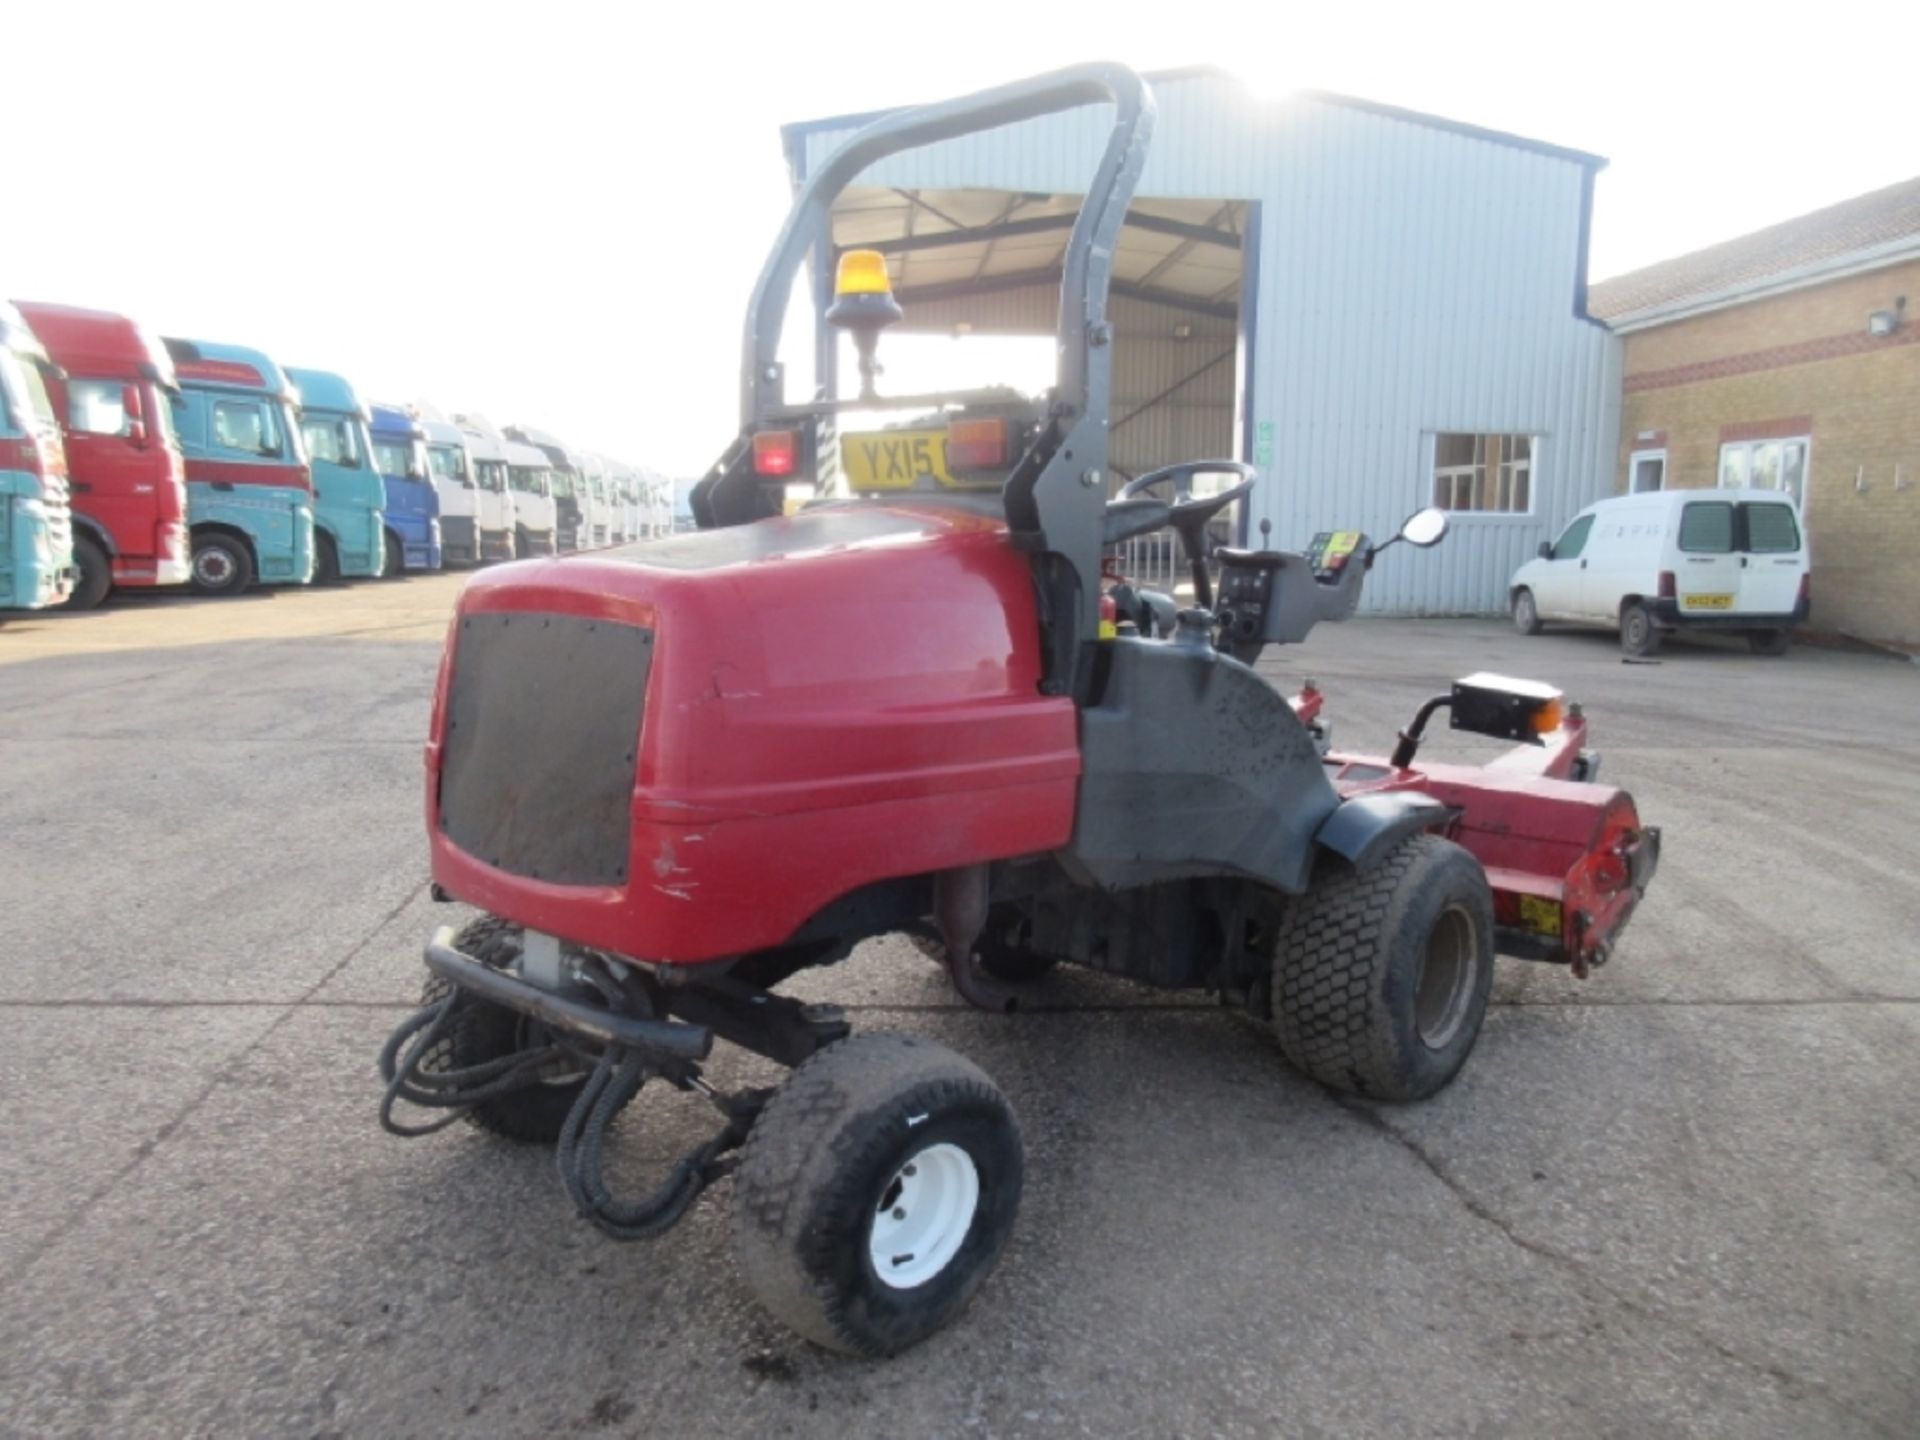 TORO GM3400 - 1498cc Plant Diesel Automatic - VIN: 30651314000111 - Year: 2015 - 2,123 Hours - - Image 3 of 8